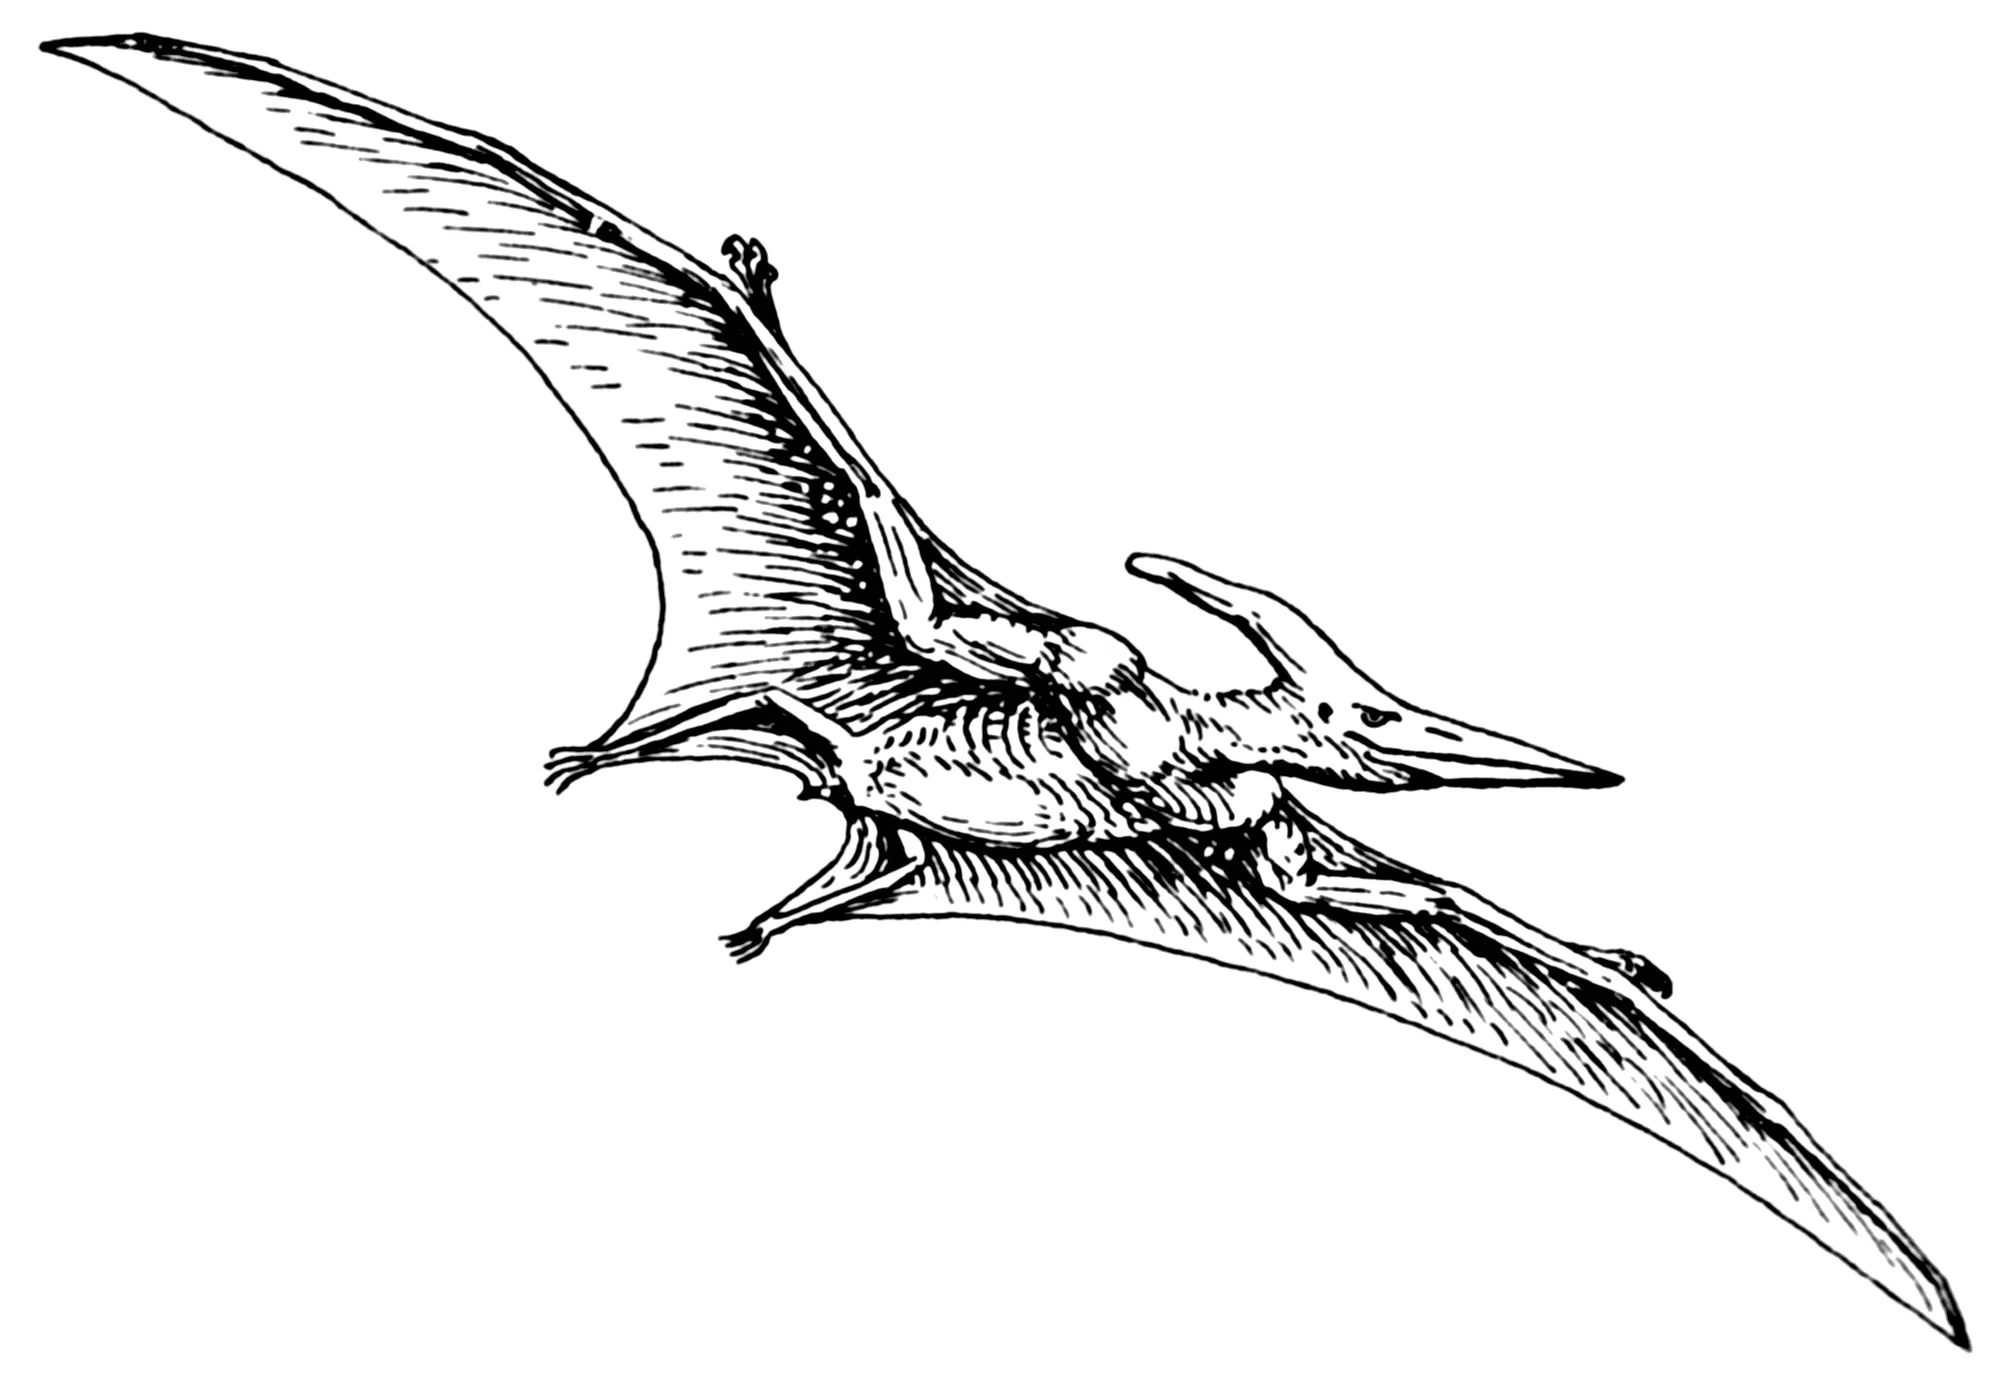 Pterodactyls are not related to present-day birds.